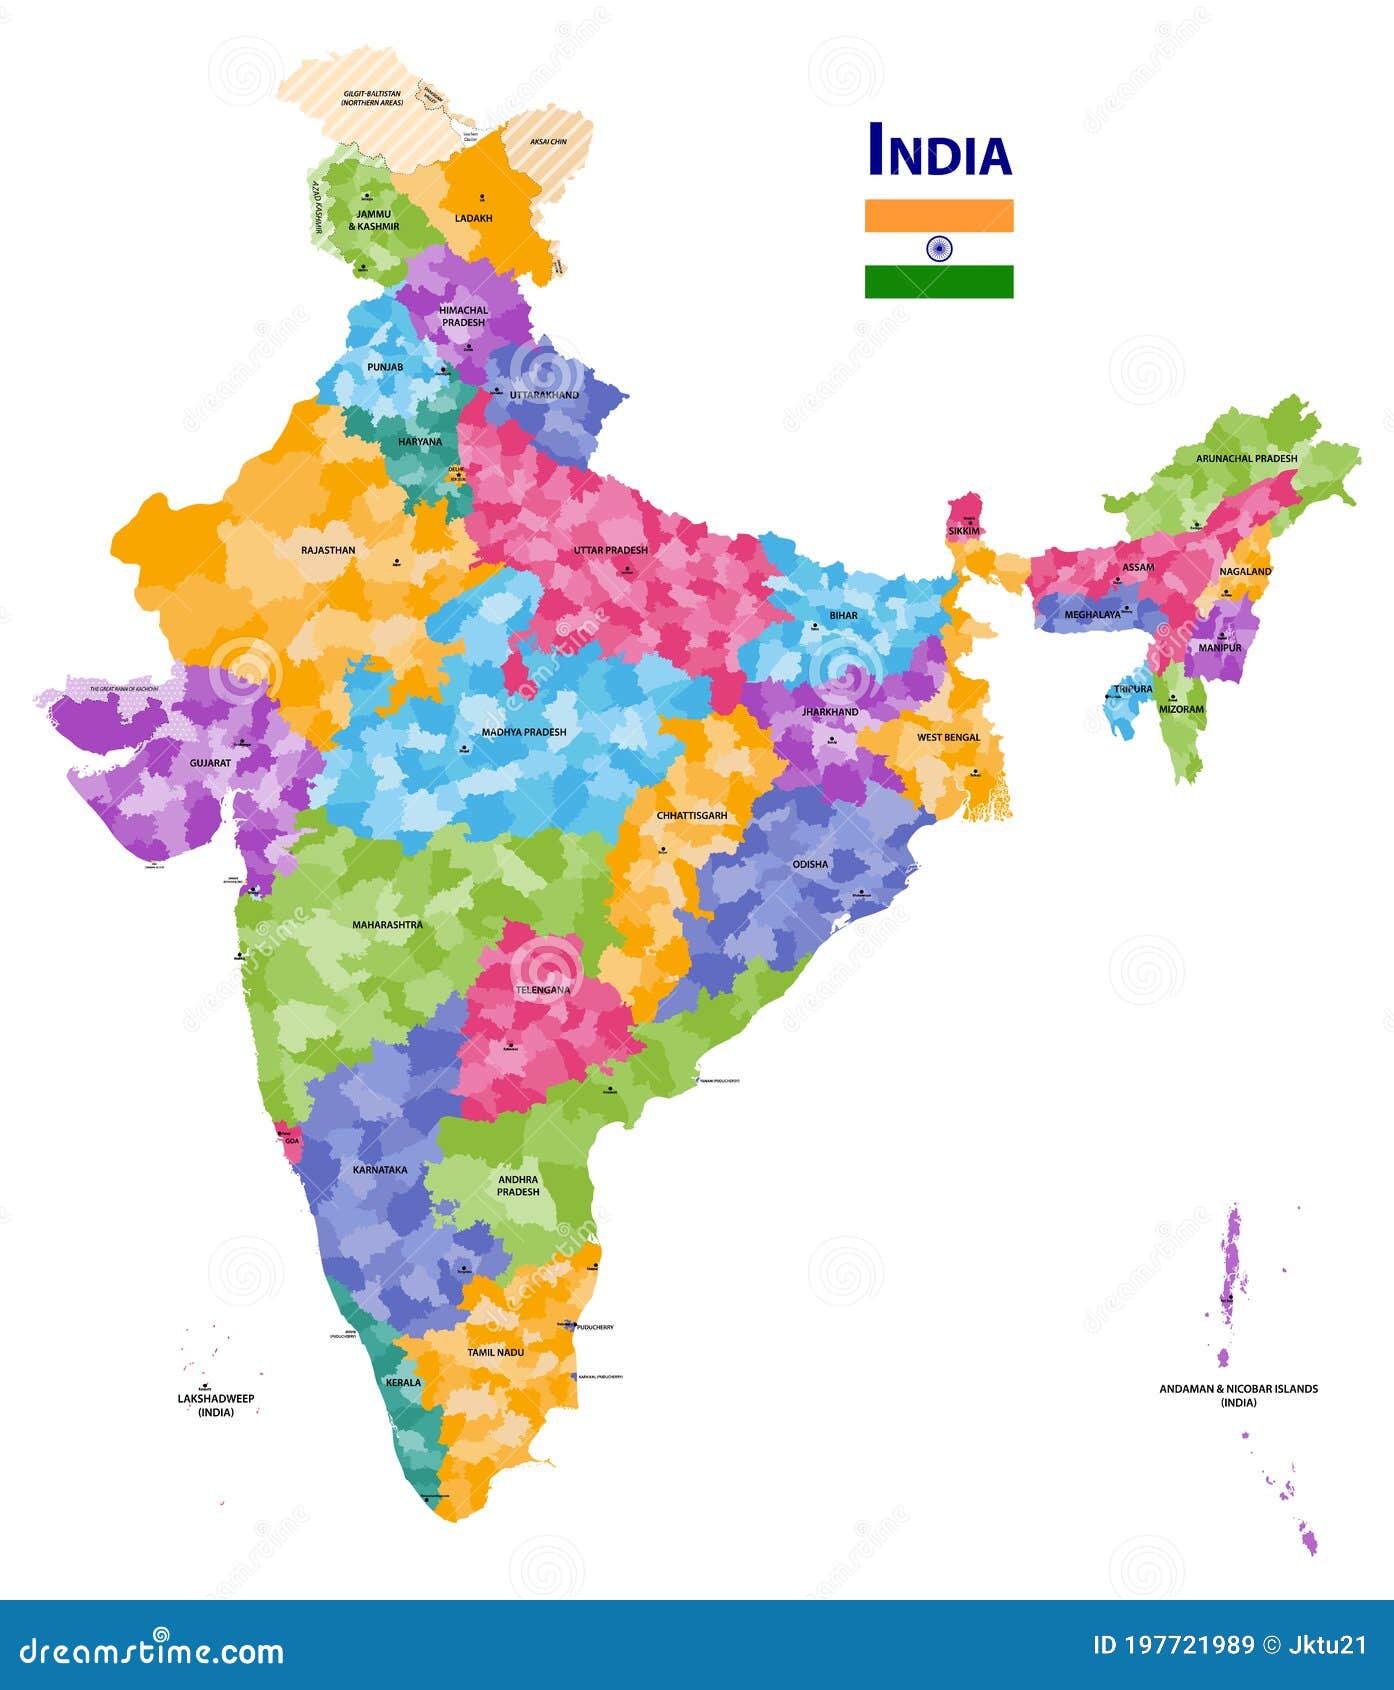 political map of india with state boundaries